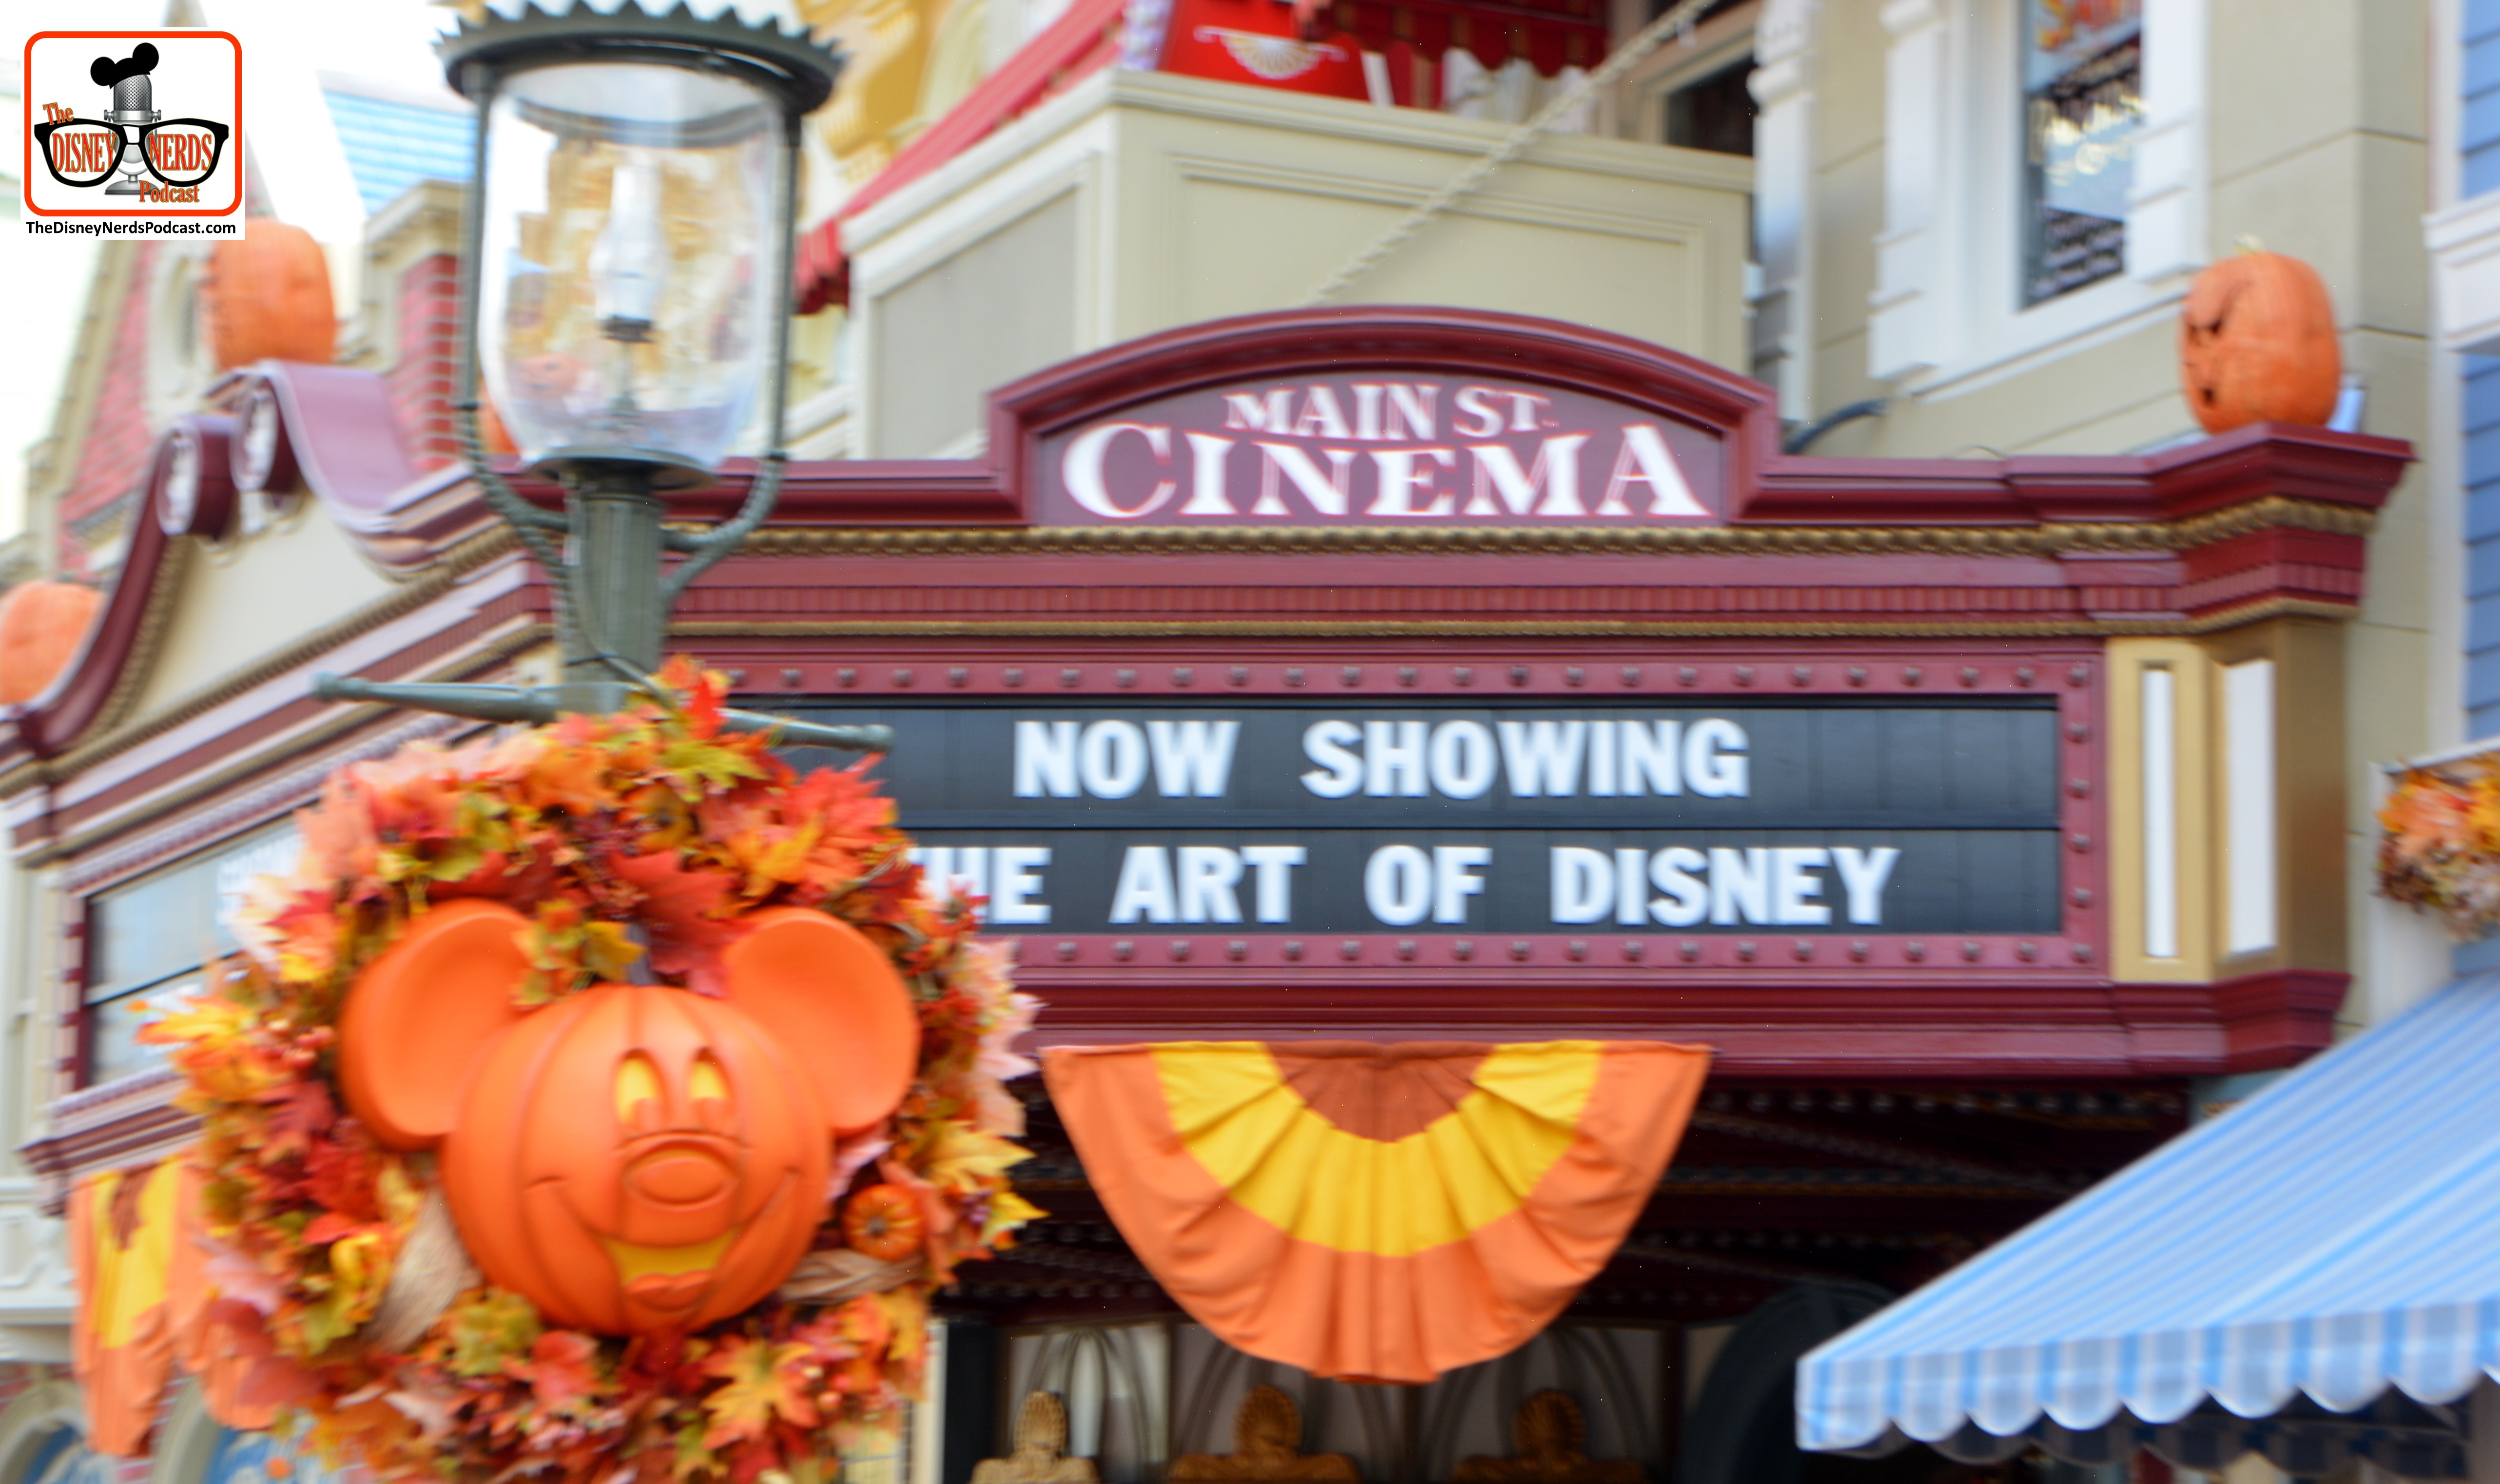 Fall is in the air at the Main Street Cinema